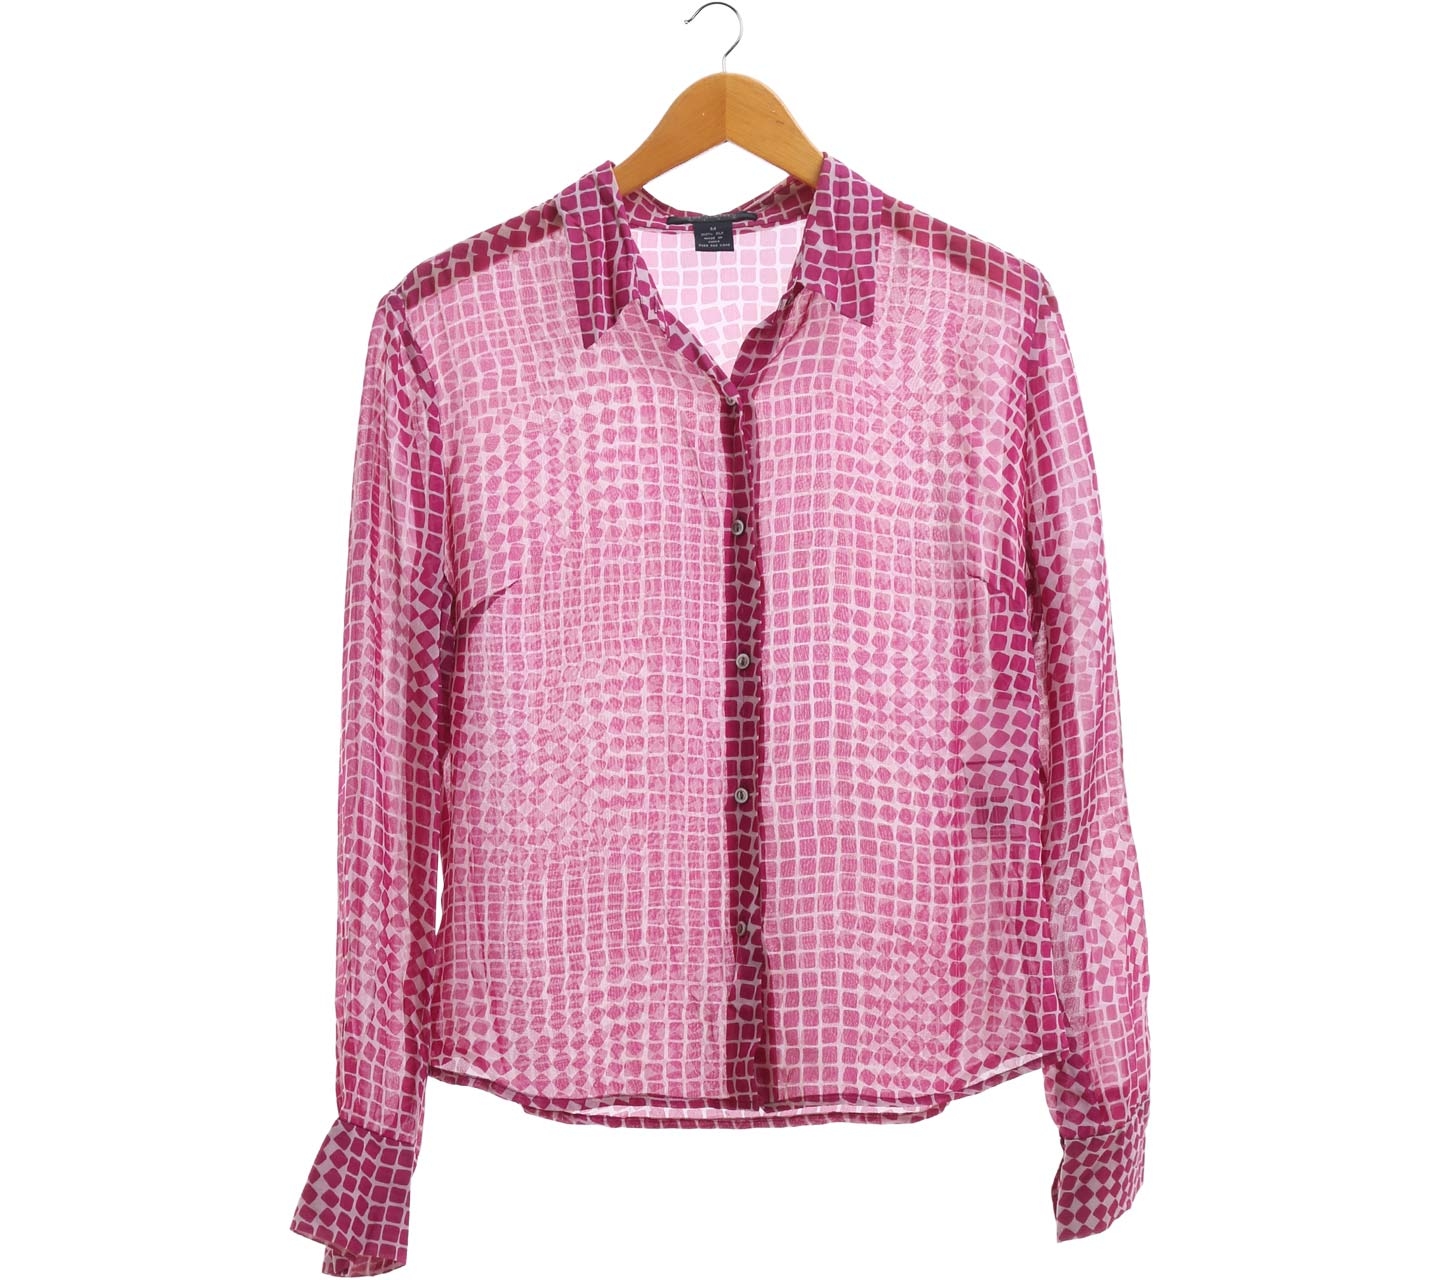 The Limited Pink Patterned Shirt